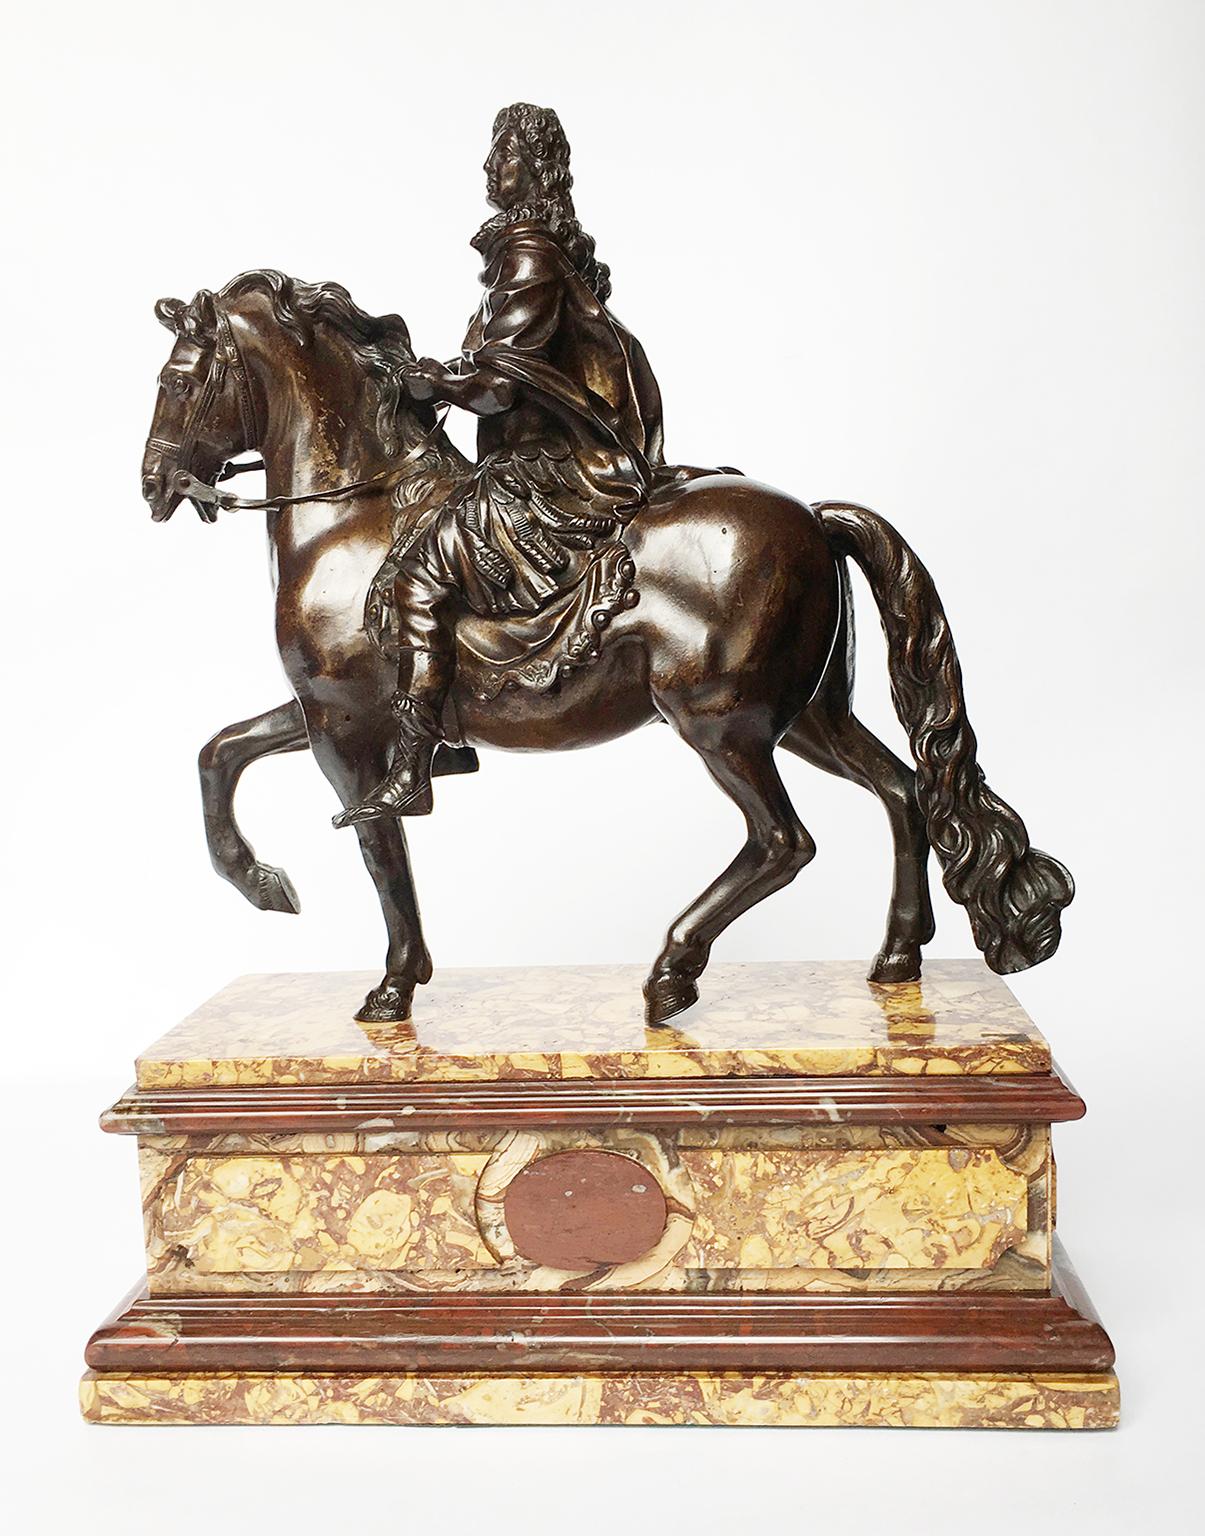 Sculpture of Louis XIV on horseback as Roman emperor
Patinated cast iron (galvanoplastic)
From the model of Martin Van Den Bogaert, called “Desjardins” (1640-1694)
France, last quarter of the 19th century
Base of Rosso Francia and Broccatello di